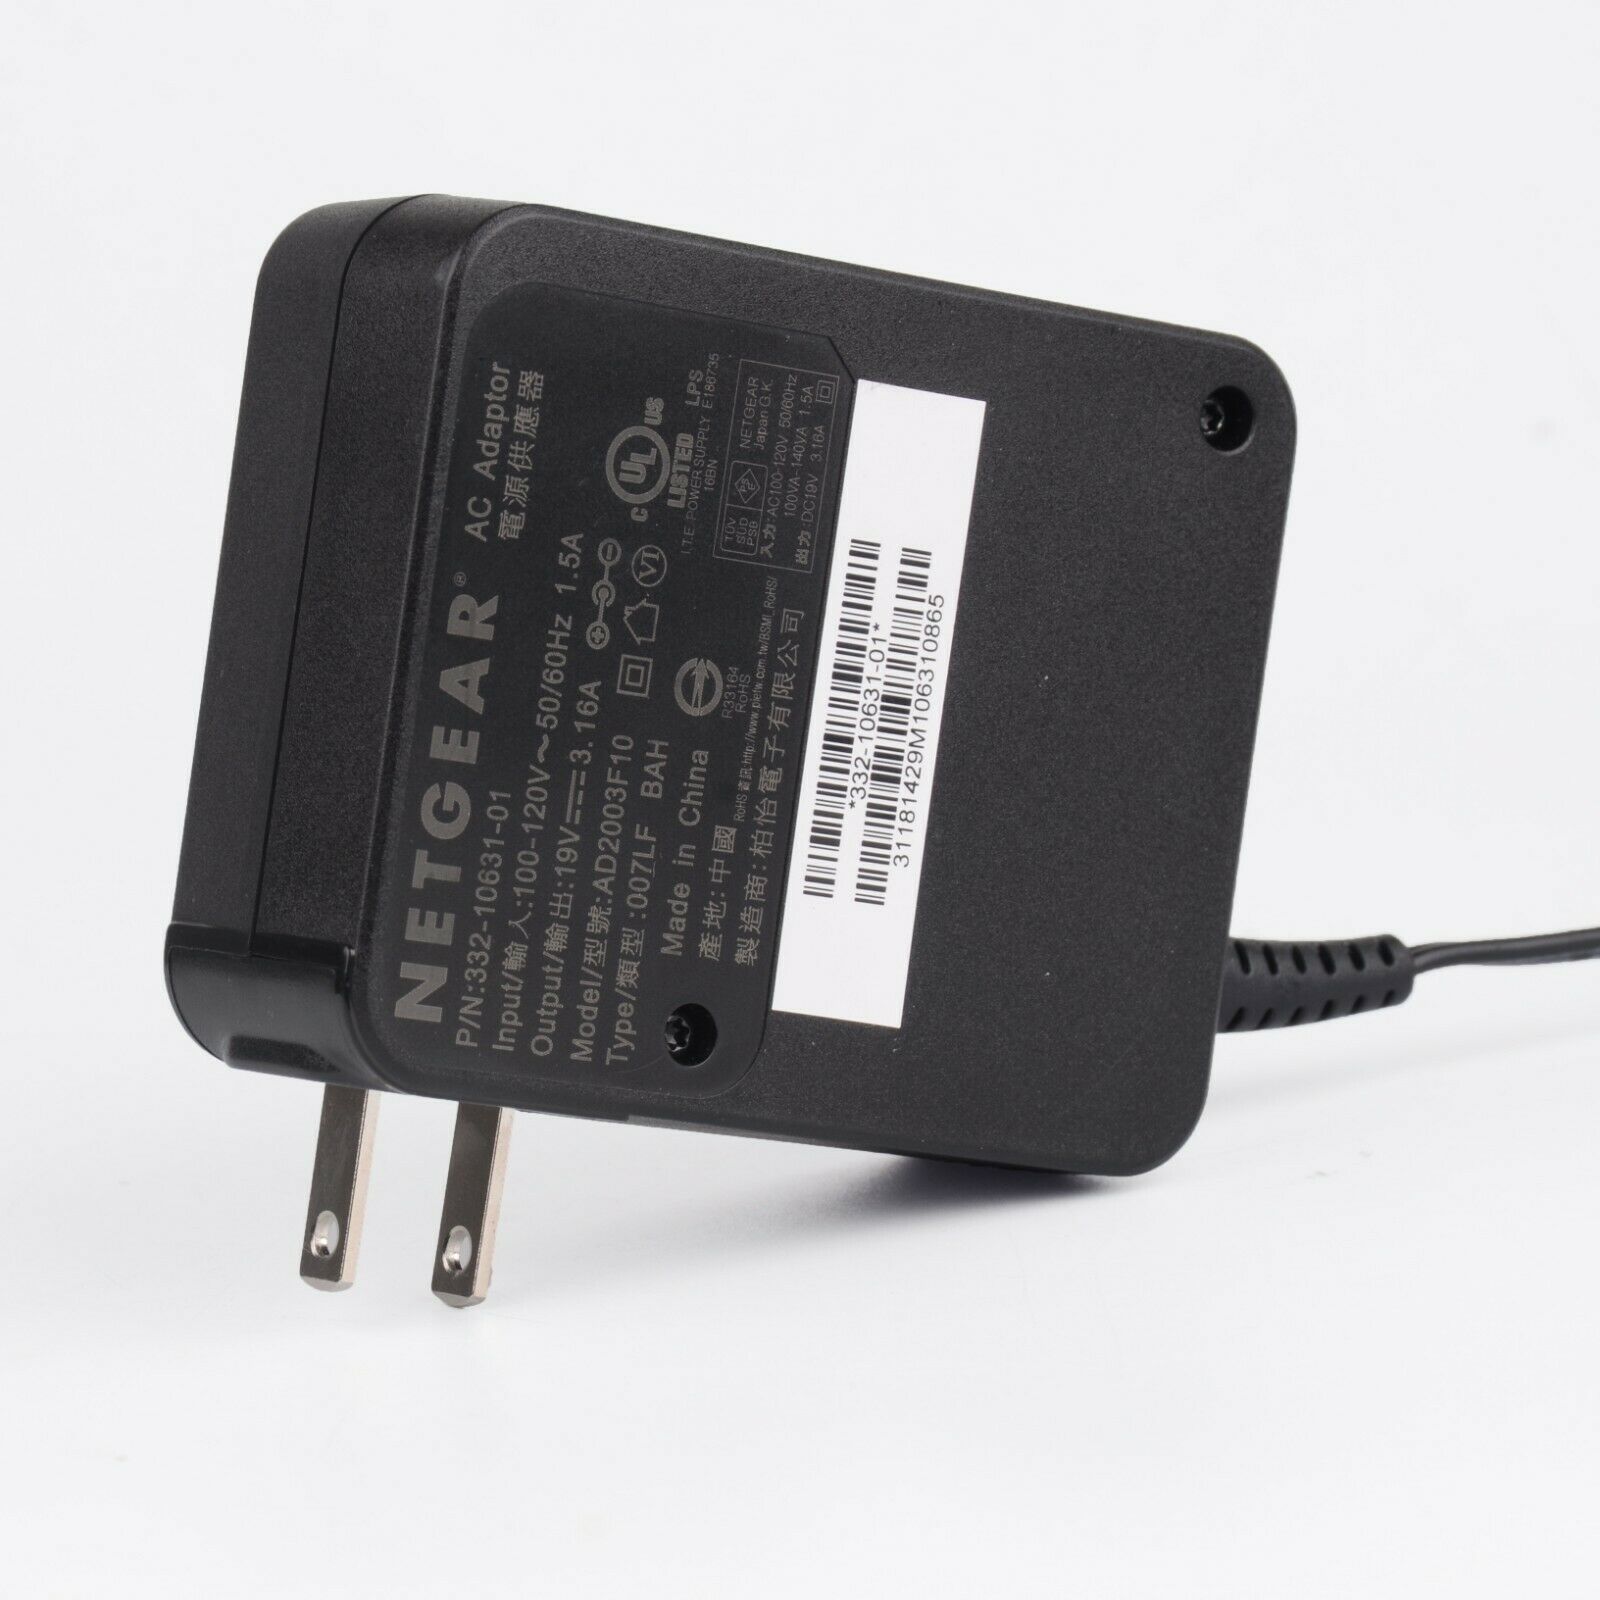 AC Adapter For NETGEAR Wifi Router R8500 R8000 X8 AC5300 R9000 19V 3.16A 120V Type: AC/DC Adapter Features: Powere - Click Image to Close